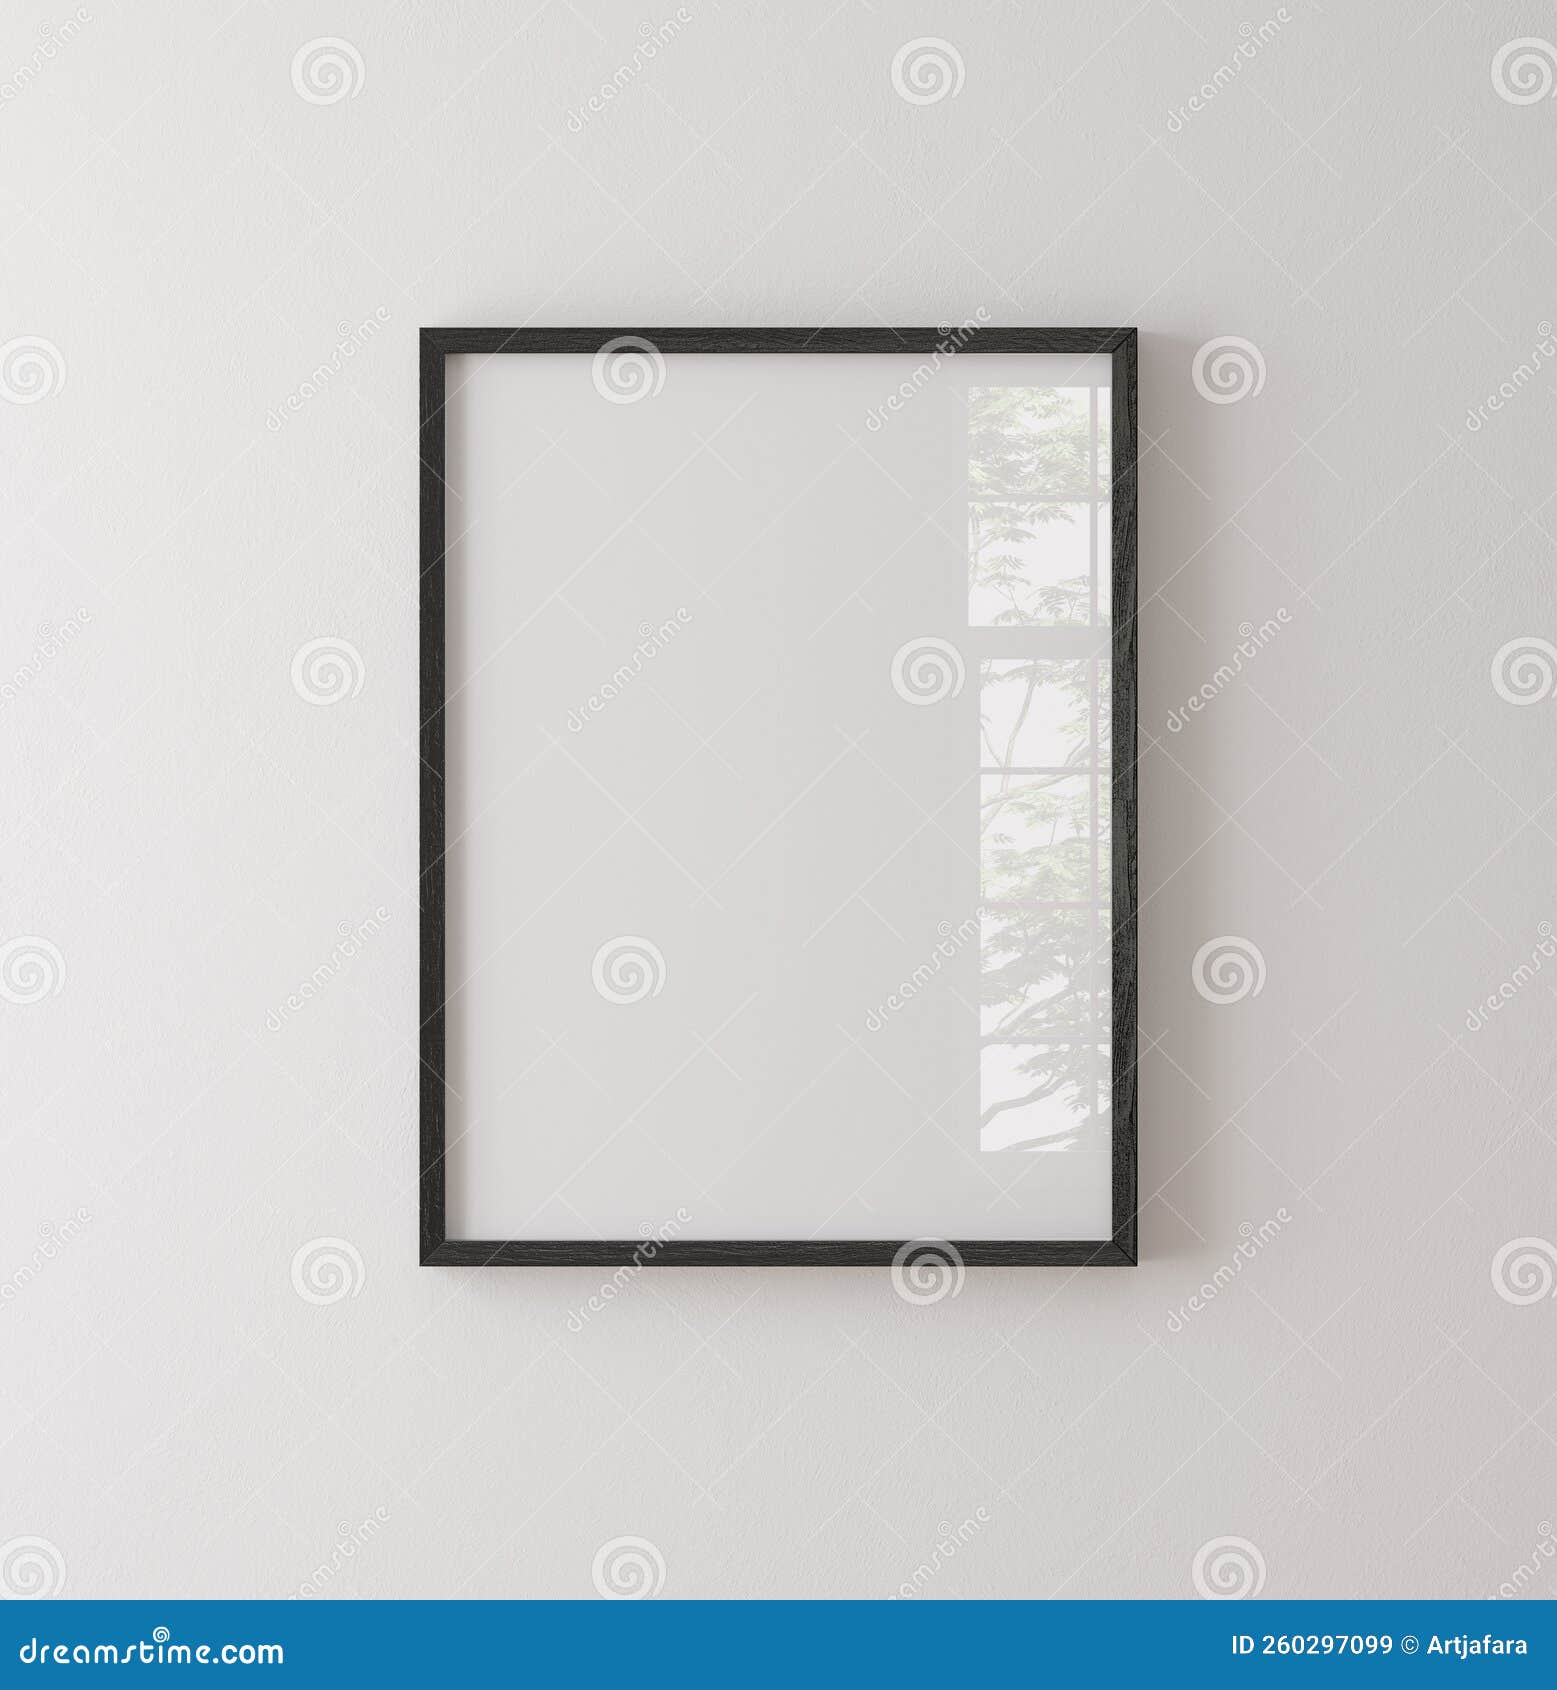 black painted wooden frame mockup close up on white wall